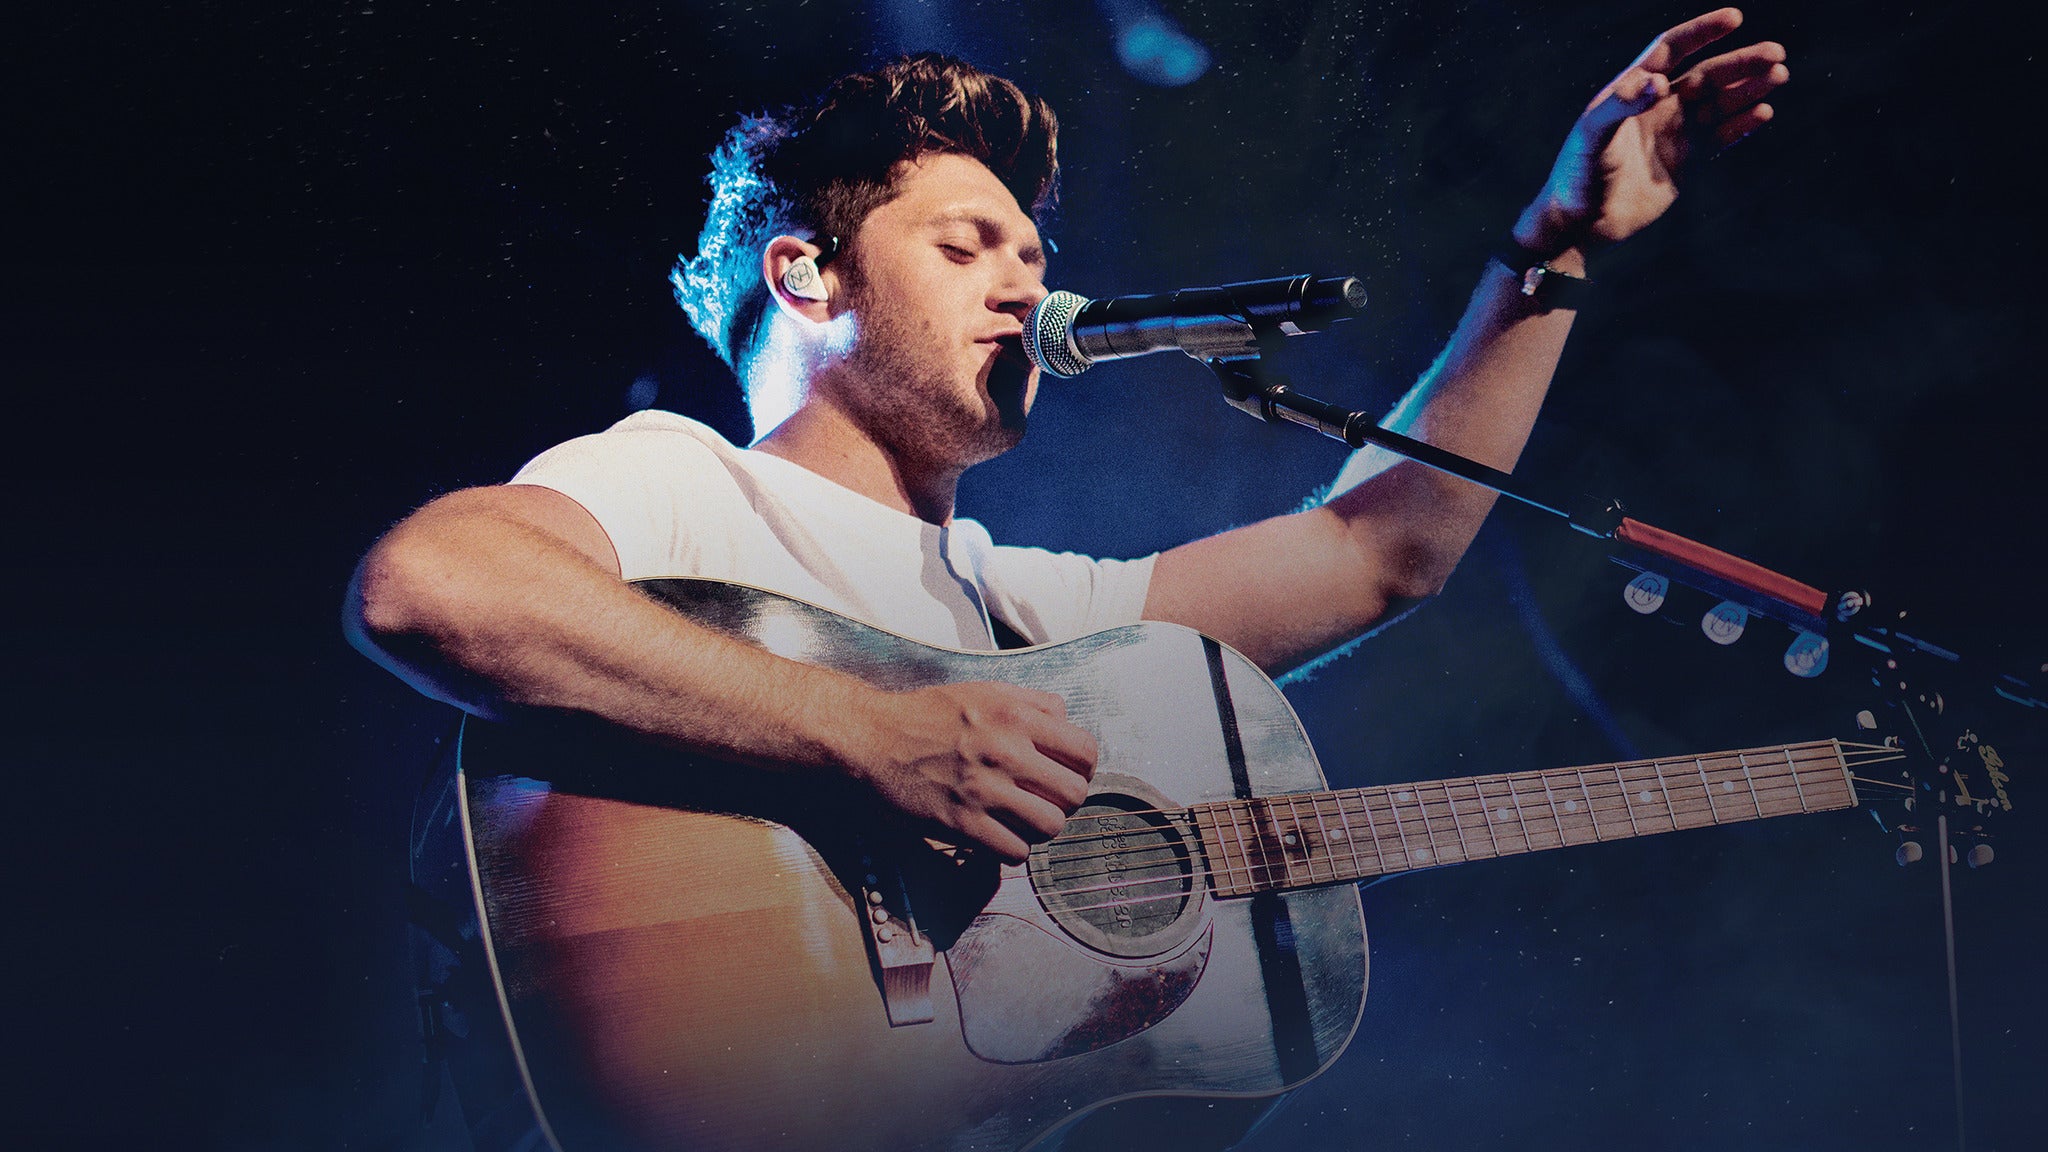 Honda Civic Tour presents Niall Horan, Nice To Meet Ya in Raleigh promo photo for Live Nation Mobile App presale offer code